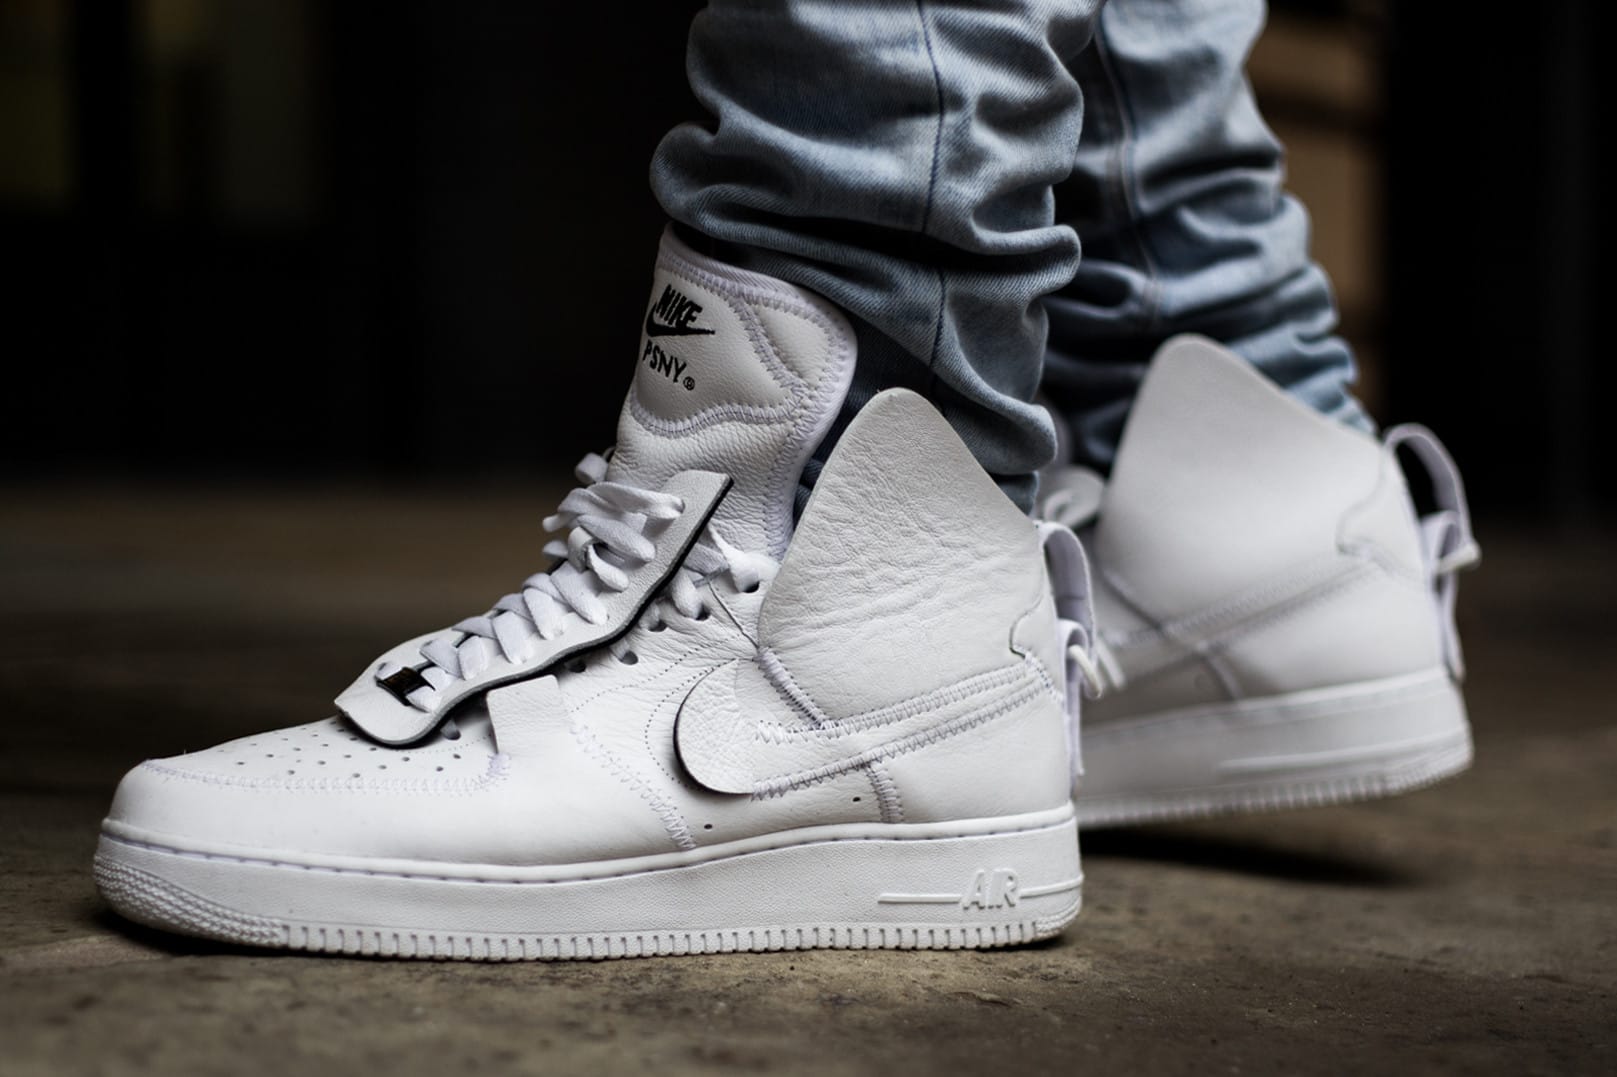 PSNY x Nike Air Force 1 High Potential Release | HYPEBEAST